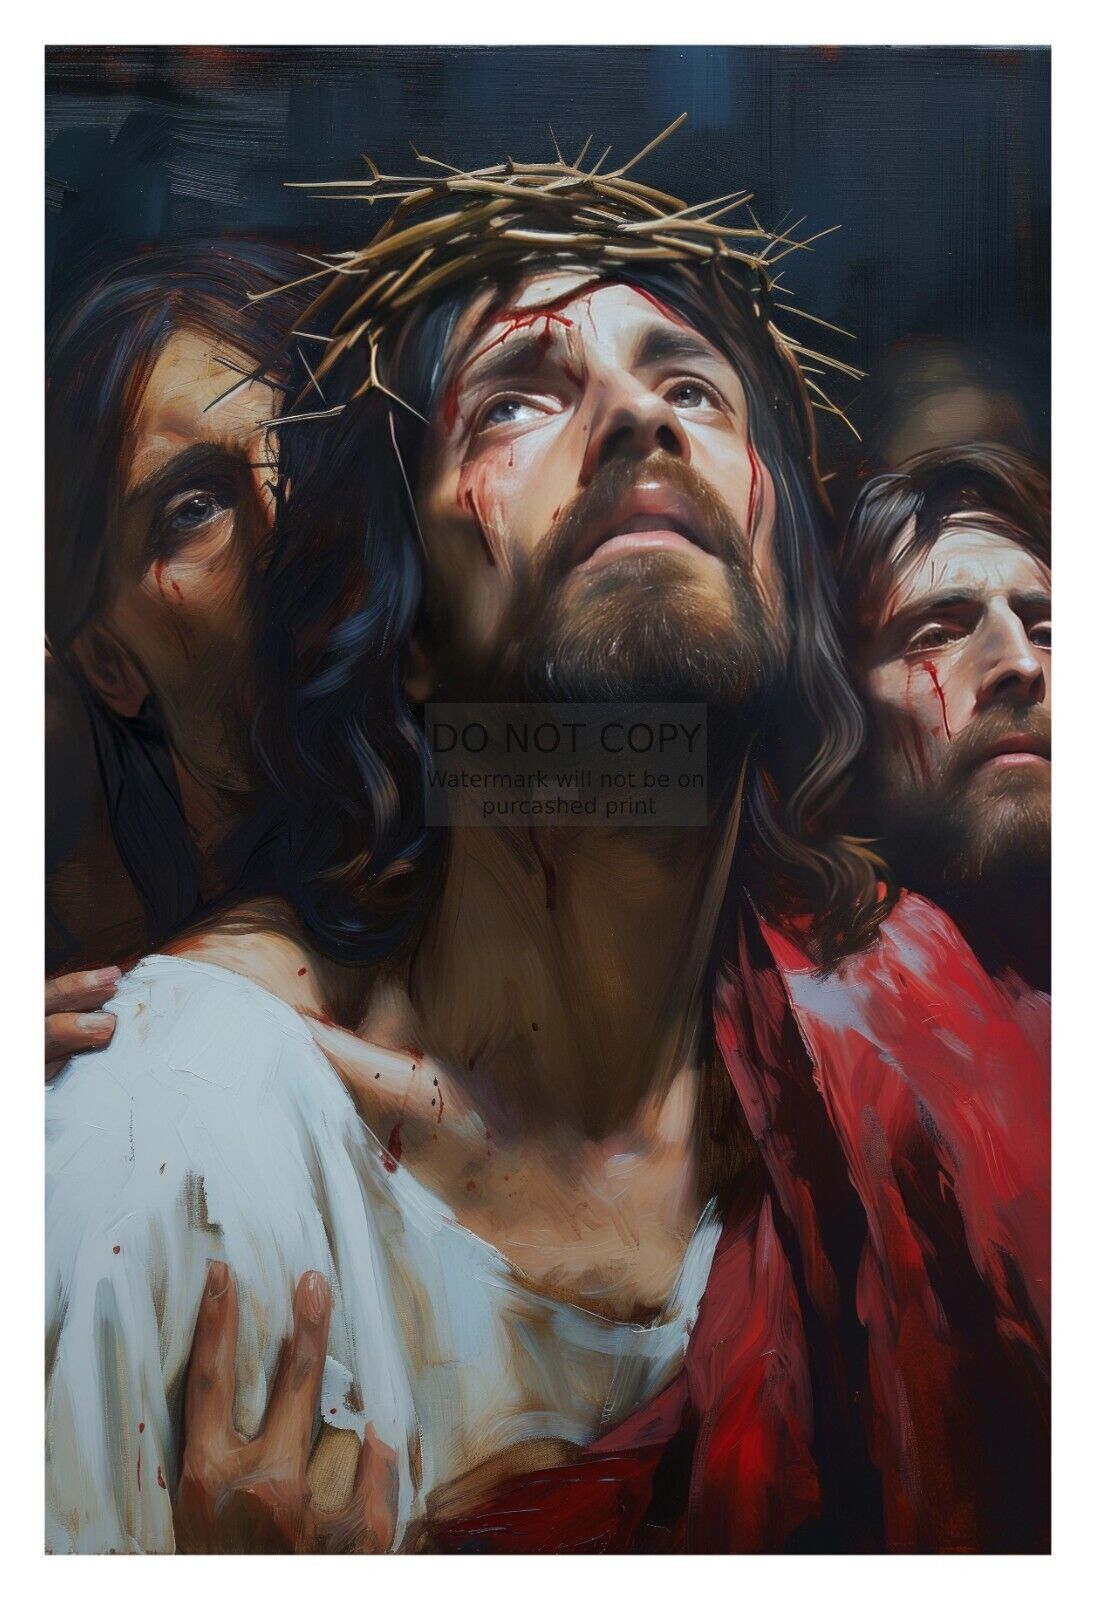 JESUS CHRIST OF NAZARETH IN CROWN OF THORNS CHRISTIAN 4X6 PHOTO